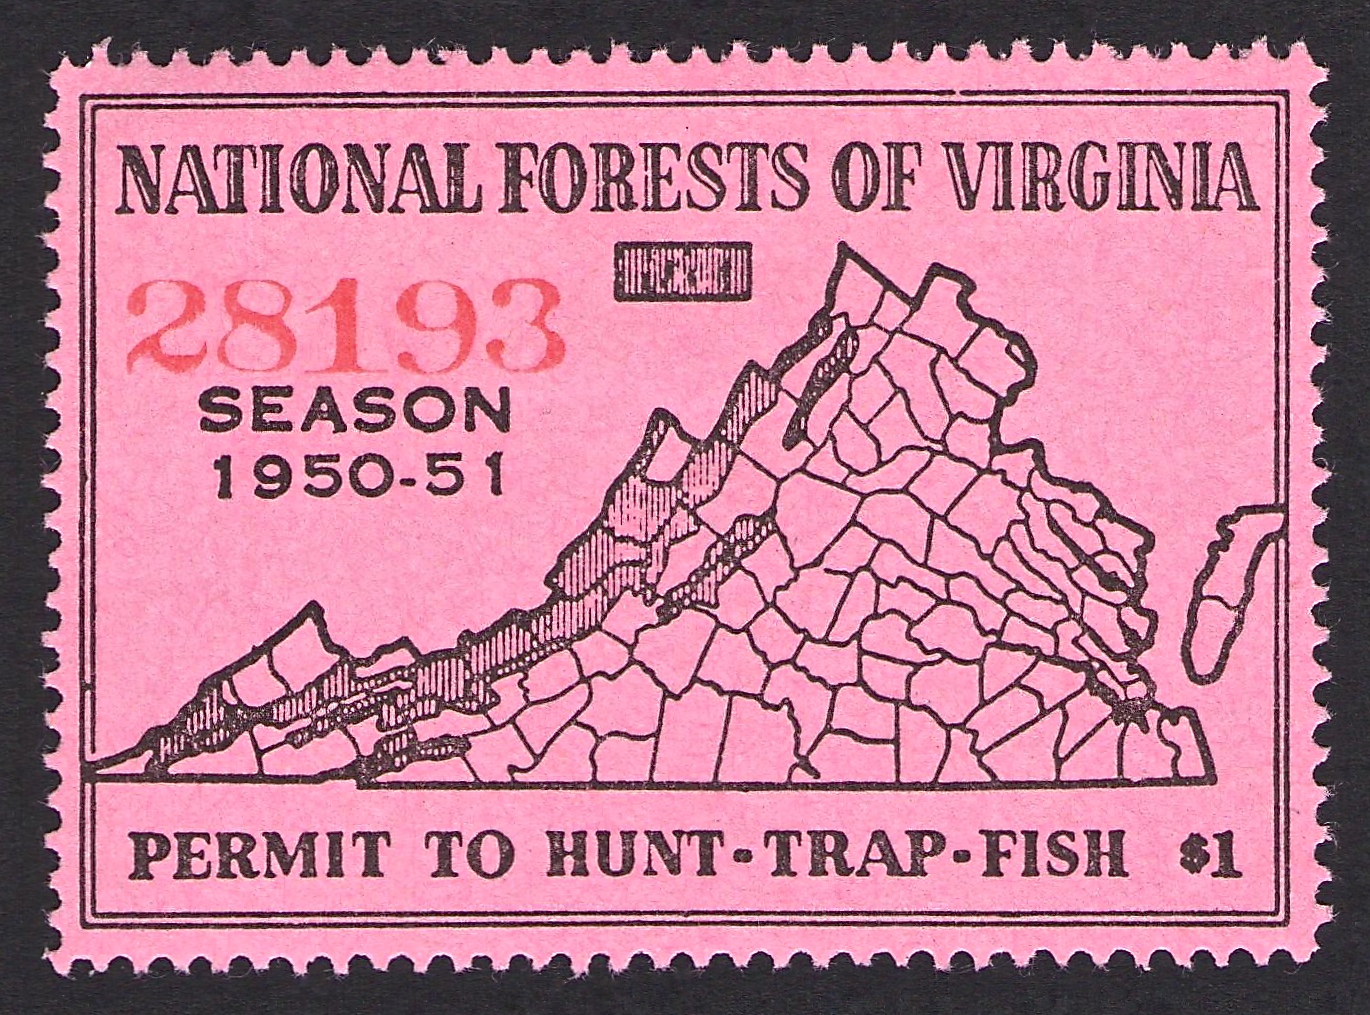 1950-51 National Forest Virginia